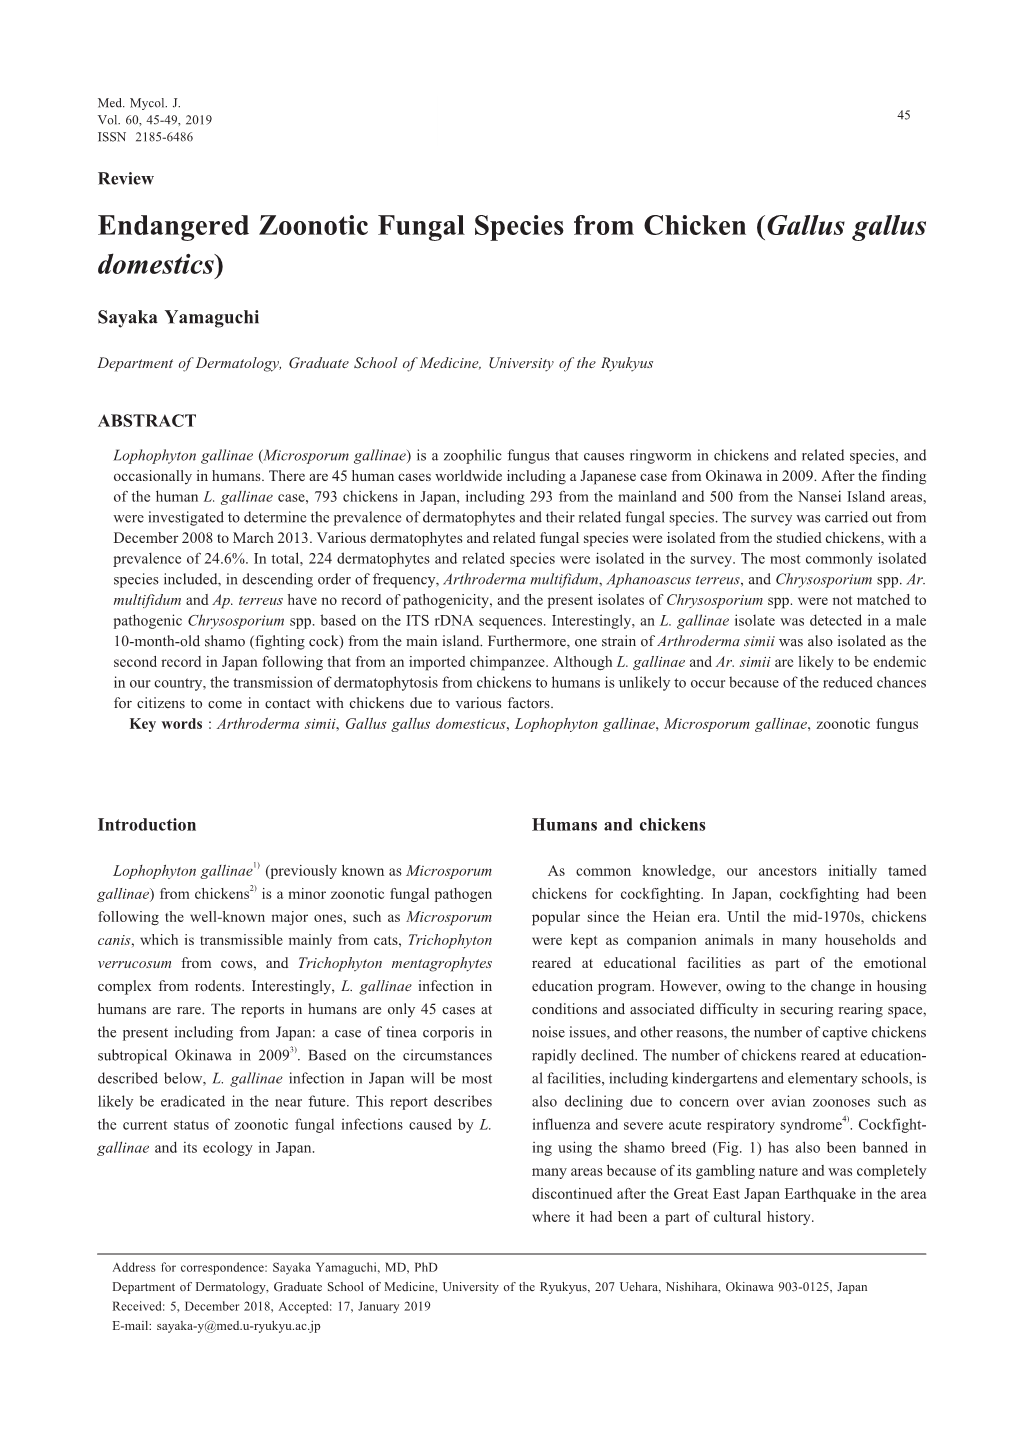 Endangered Zoonotic Fungal Species from Chicken (Gallus Gallus Domestics)